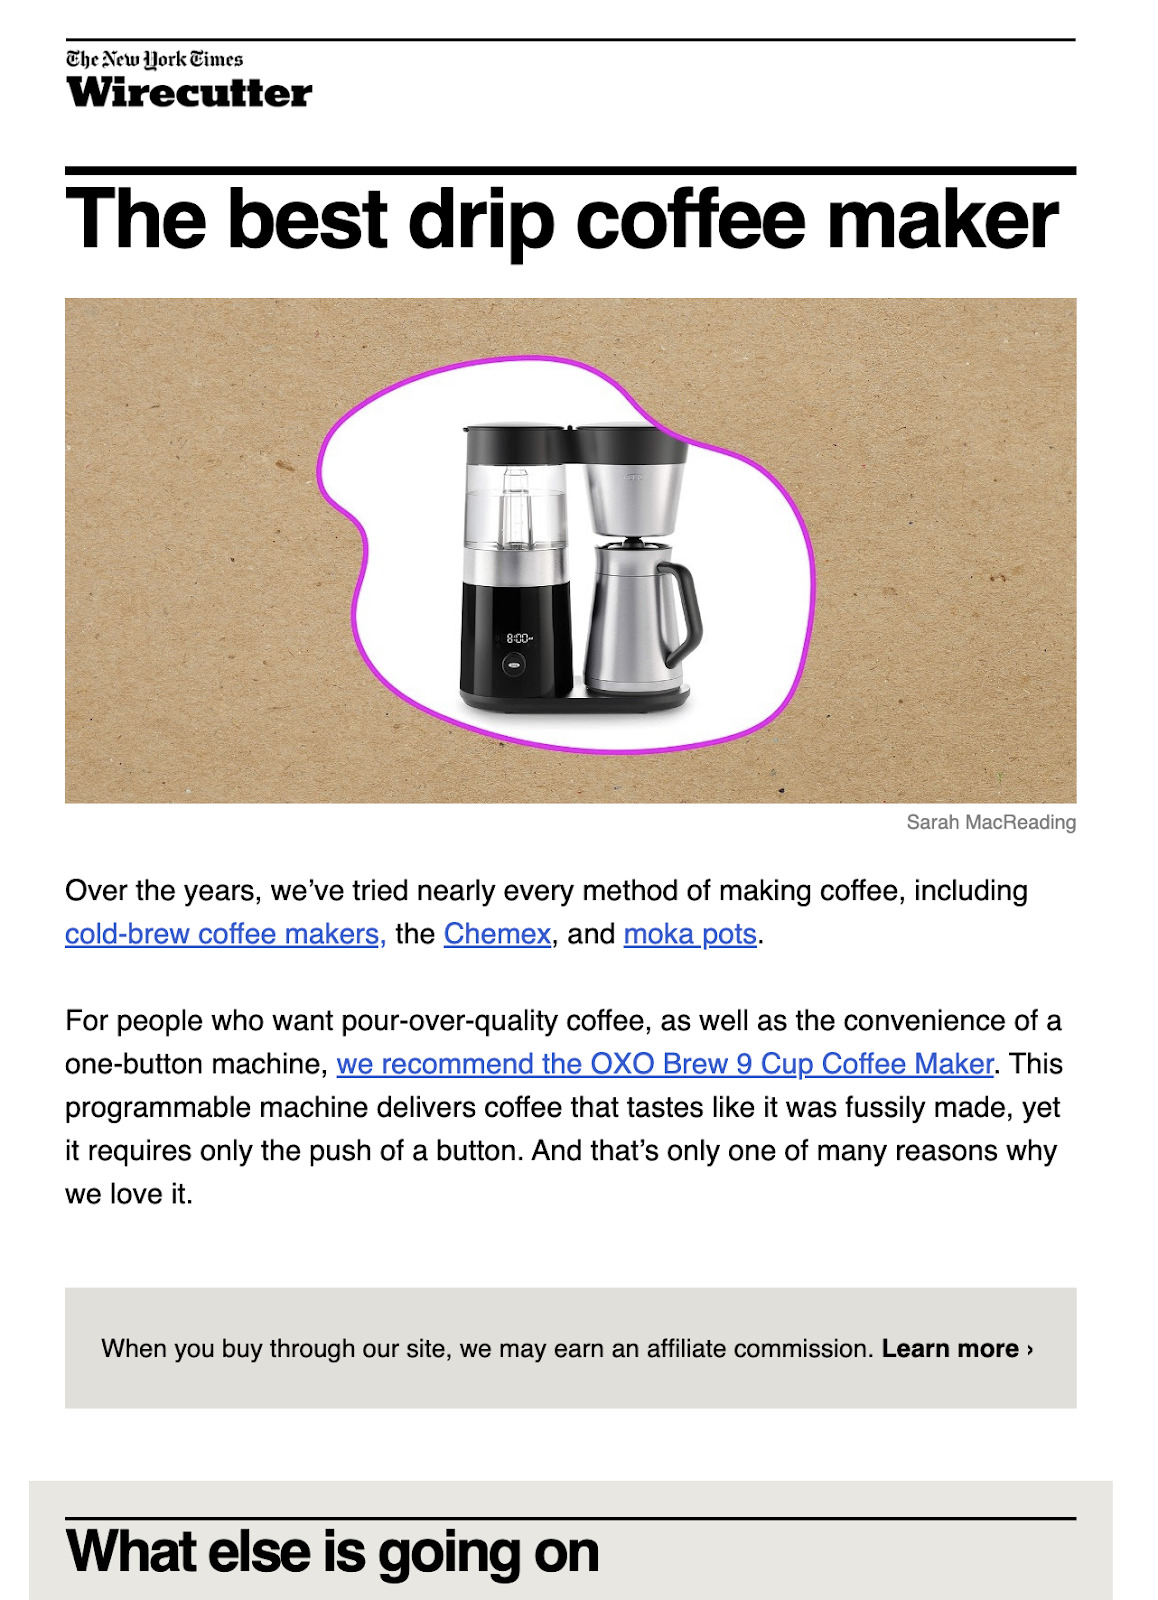 Excerpt of Wirecutter newsletter about the best drip coffee maker 